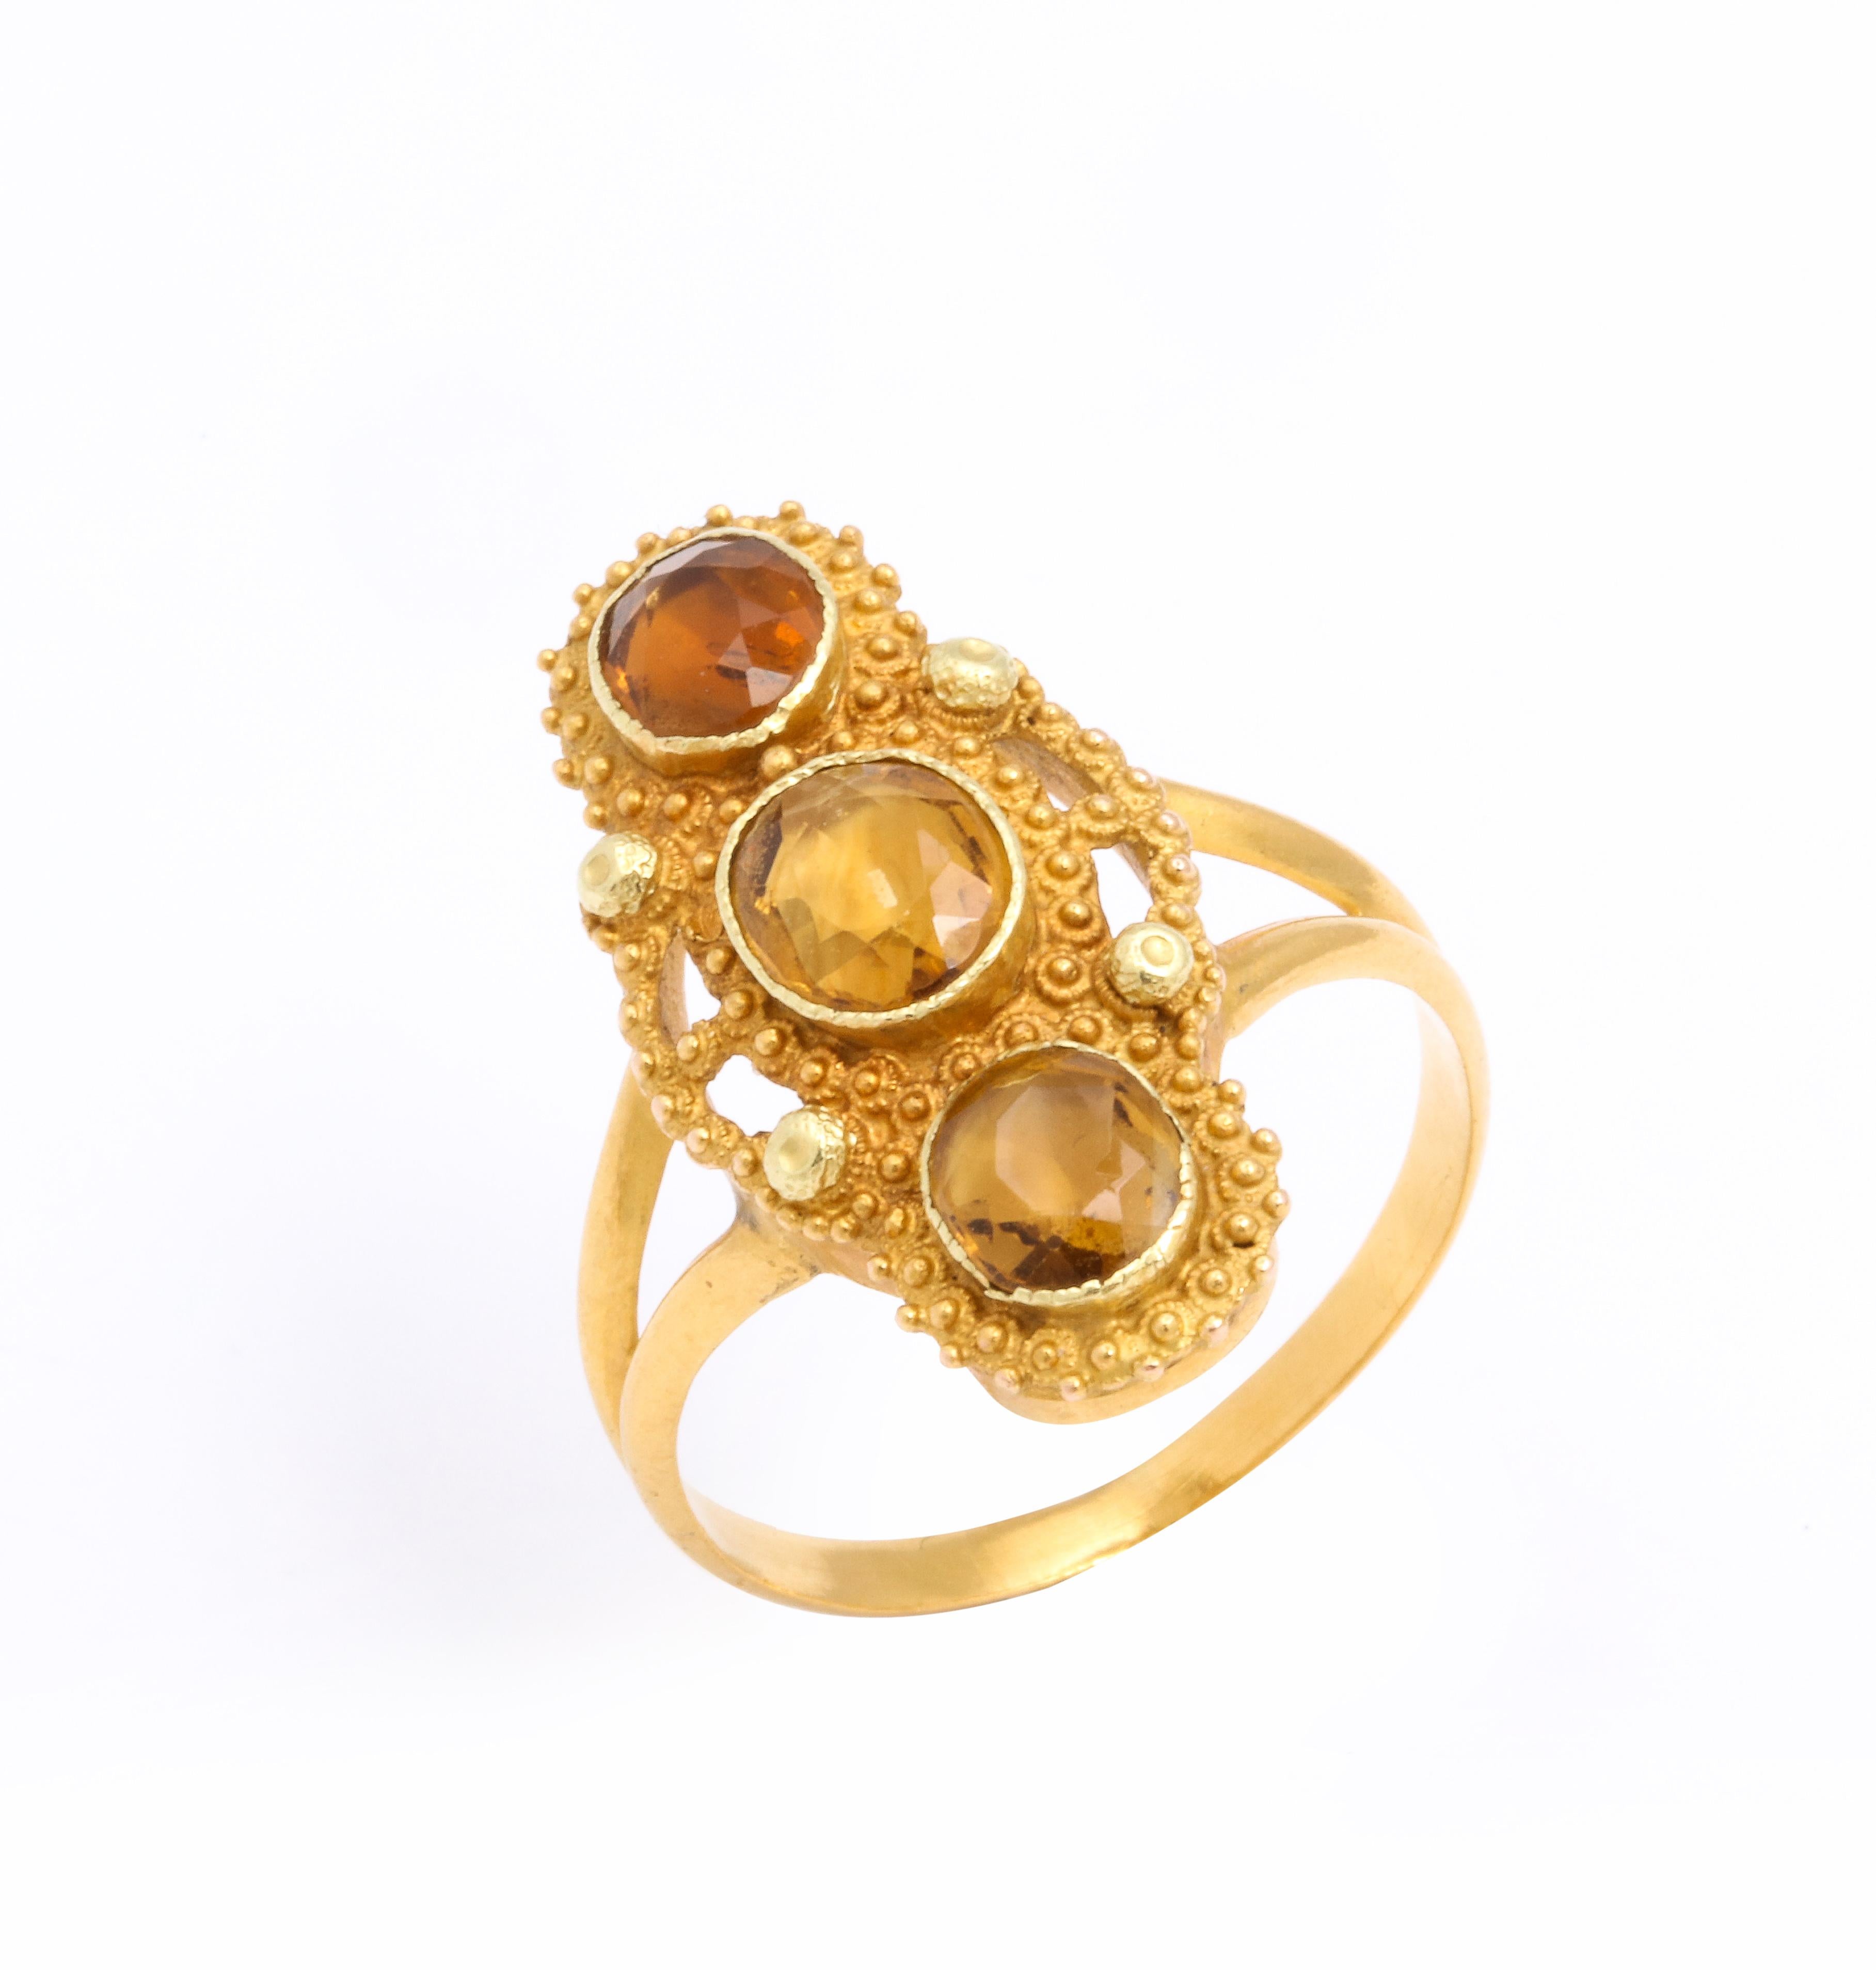 Three oval topaz gems are vertically set in 18 Kt Gold in this Georgian ring. The gems look as if drops of honey spiked into place on this three stone setting. Superb gold work stands out in the smallest spirals of cannetille work and the minute